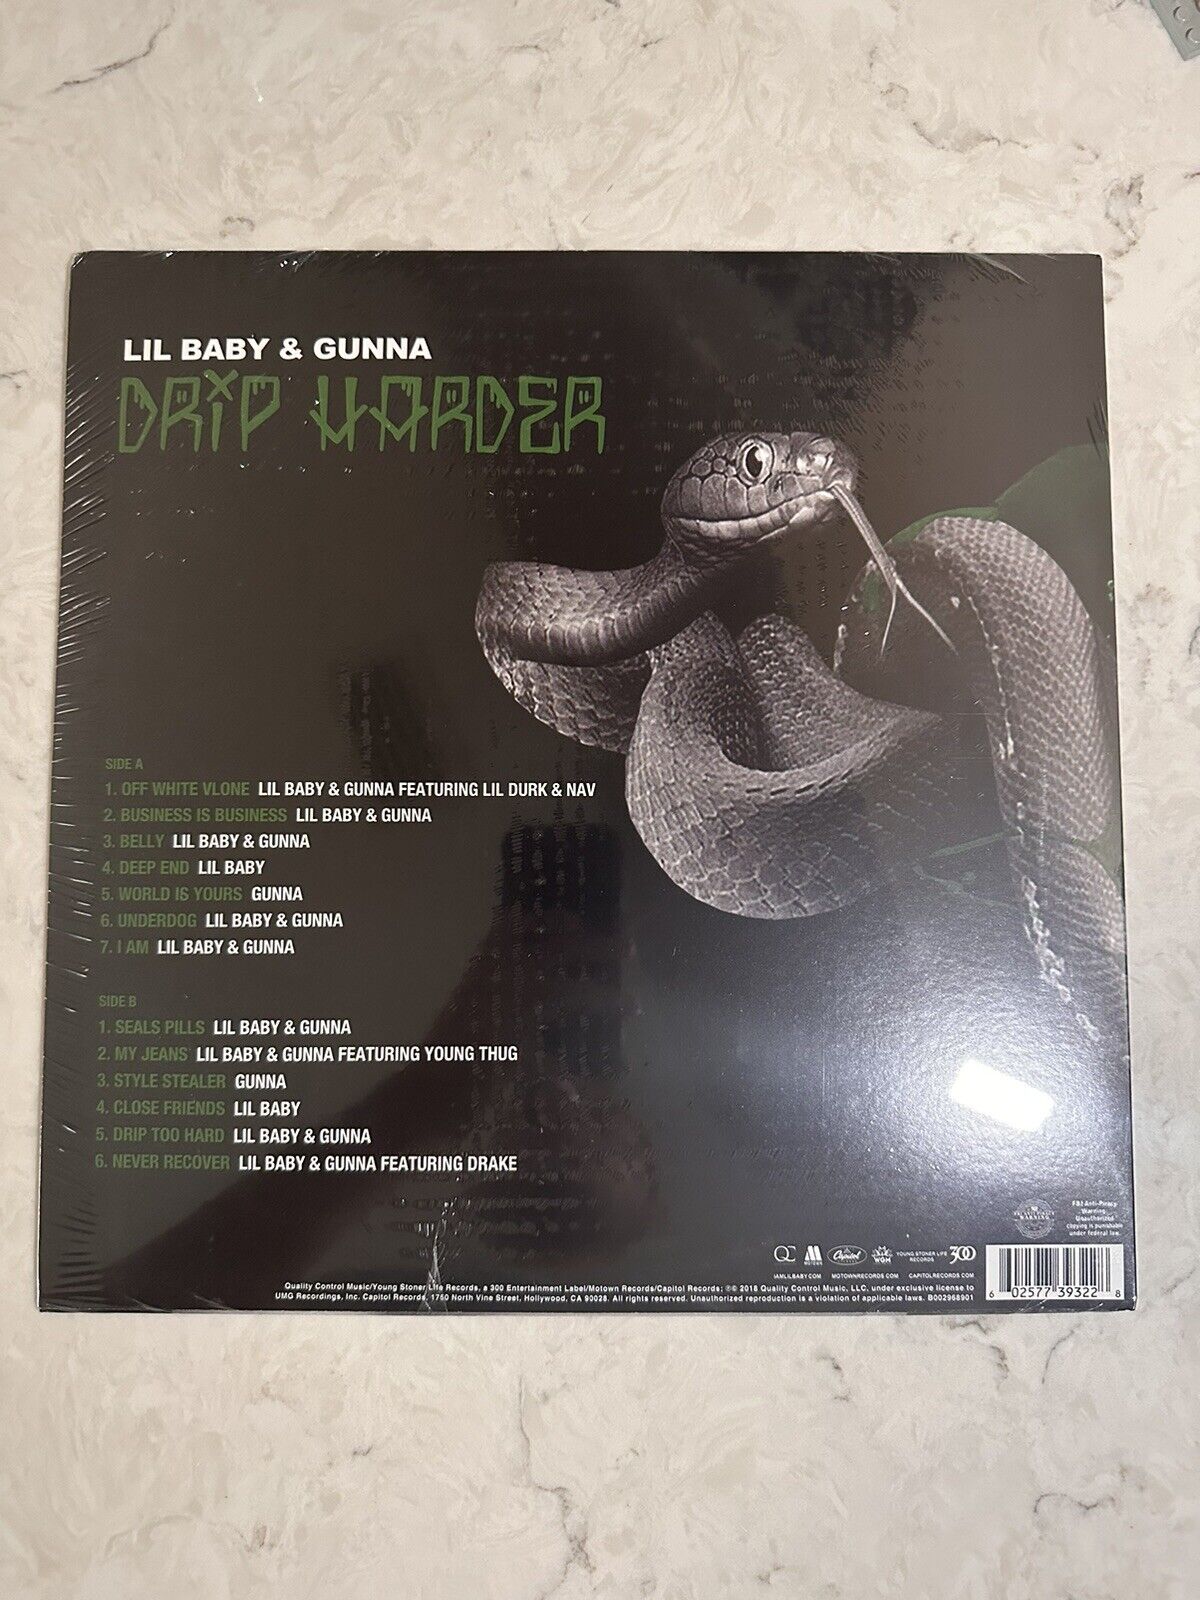 Lil Baby and Gunna - Drip Harder Limited Green LP Vinyl Record 